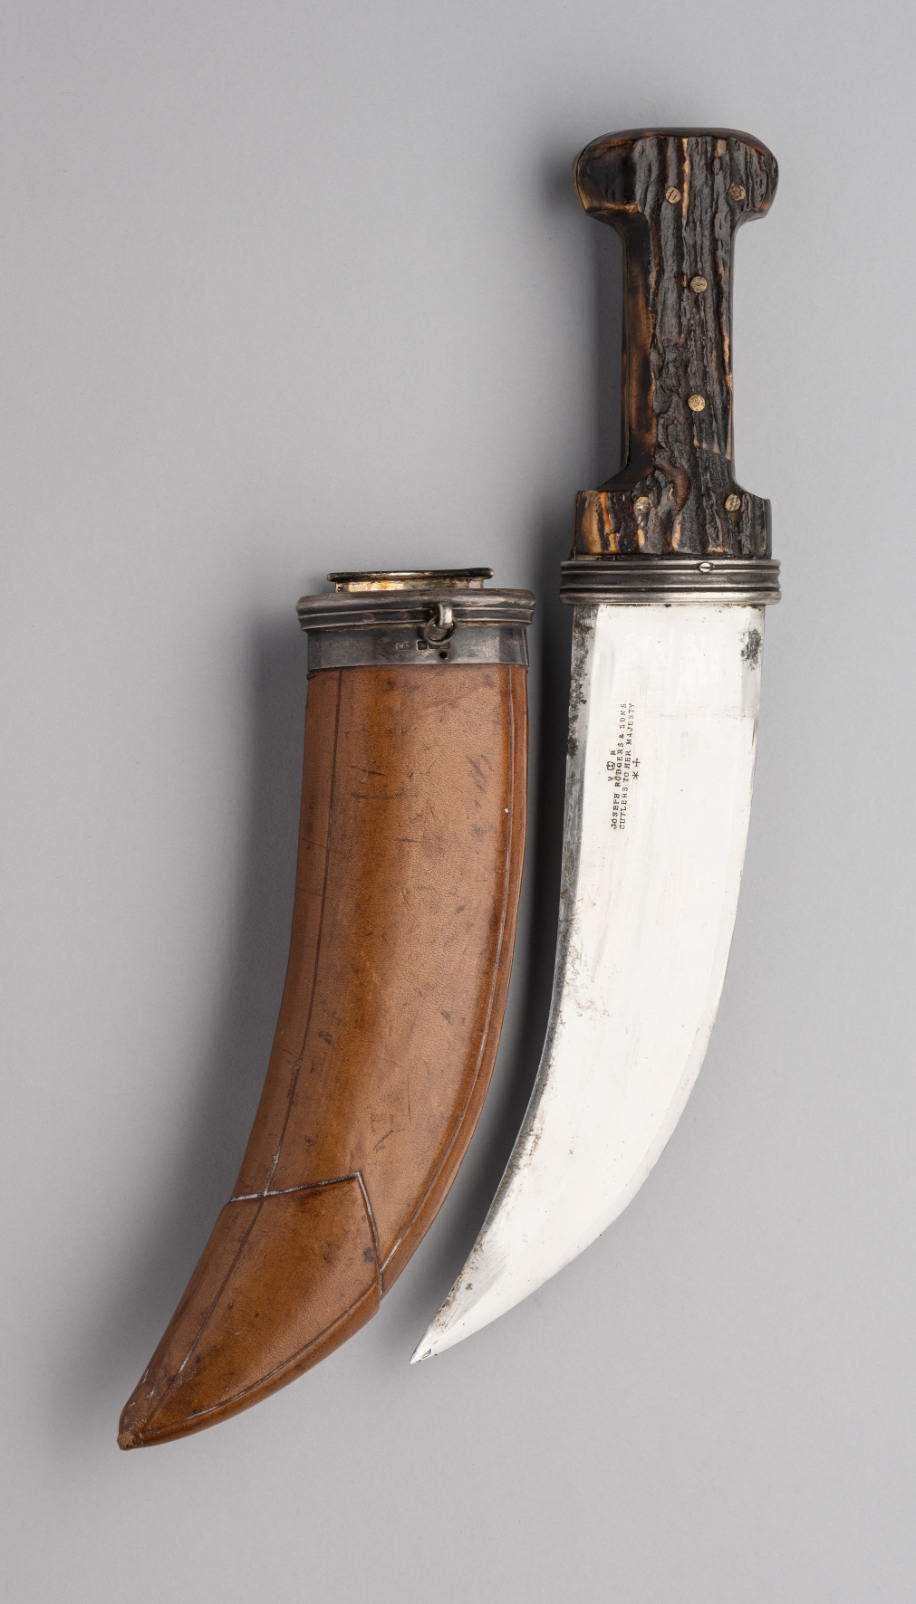 A RARE SILVER-MOUNTED JAMBIYA STYLE DAGGER FOR THE ARAB MARKET, JOSEPH RODGERS AND SONS, CUTLERS TO